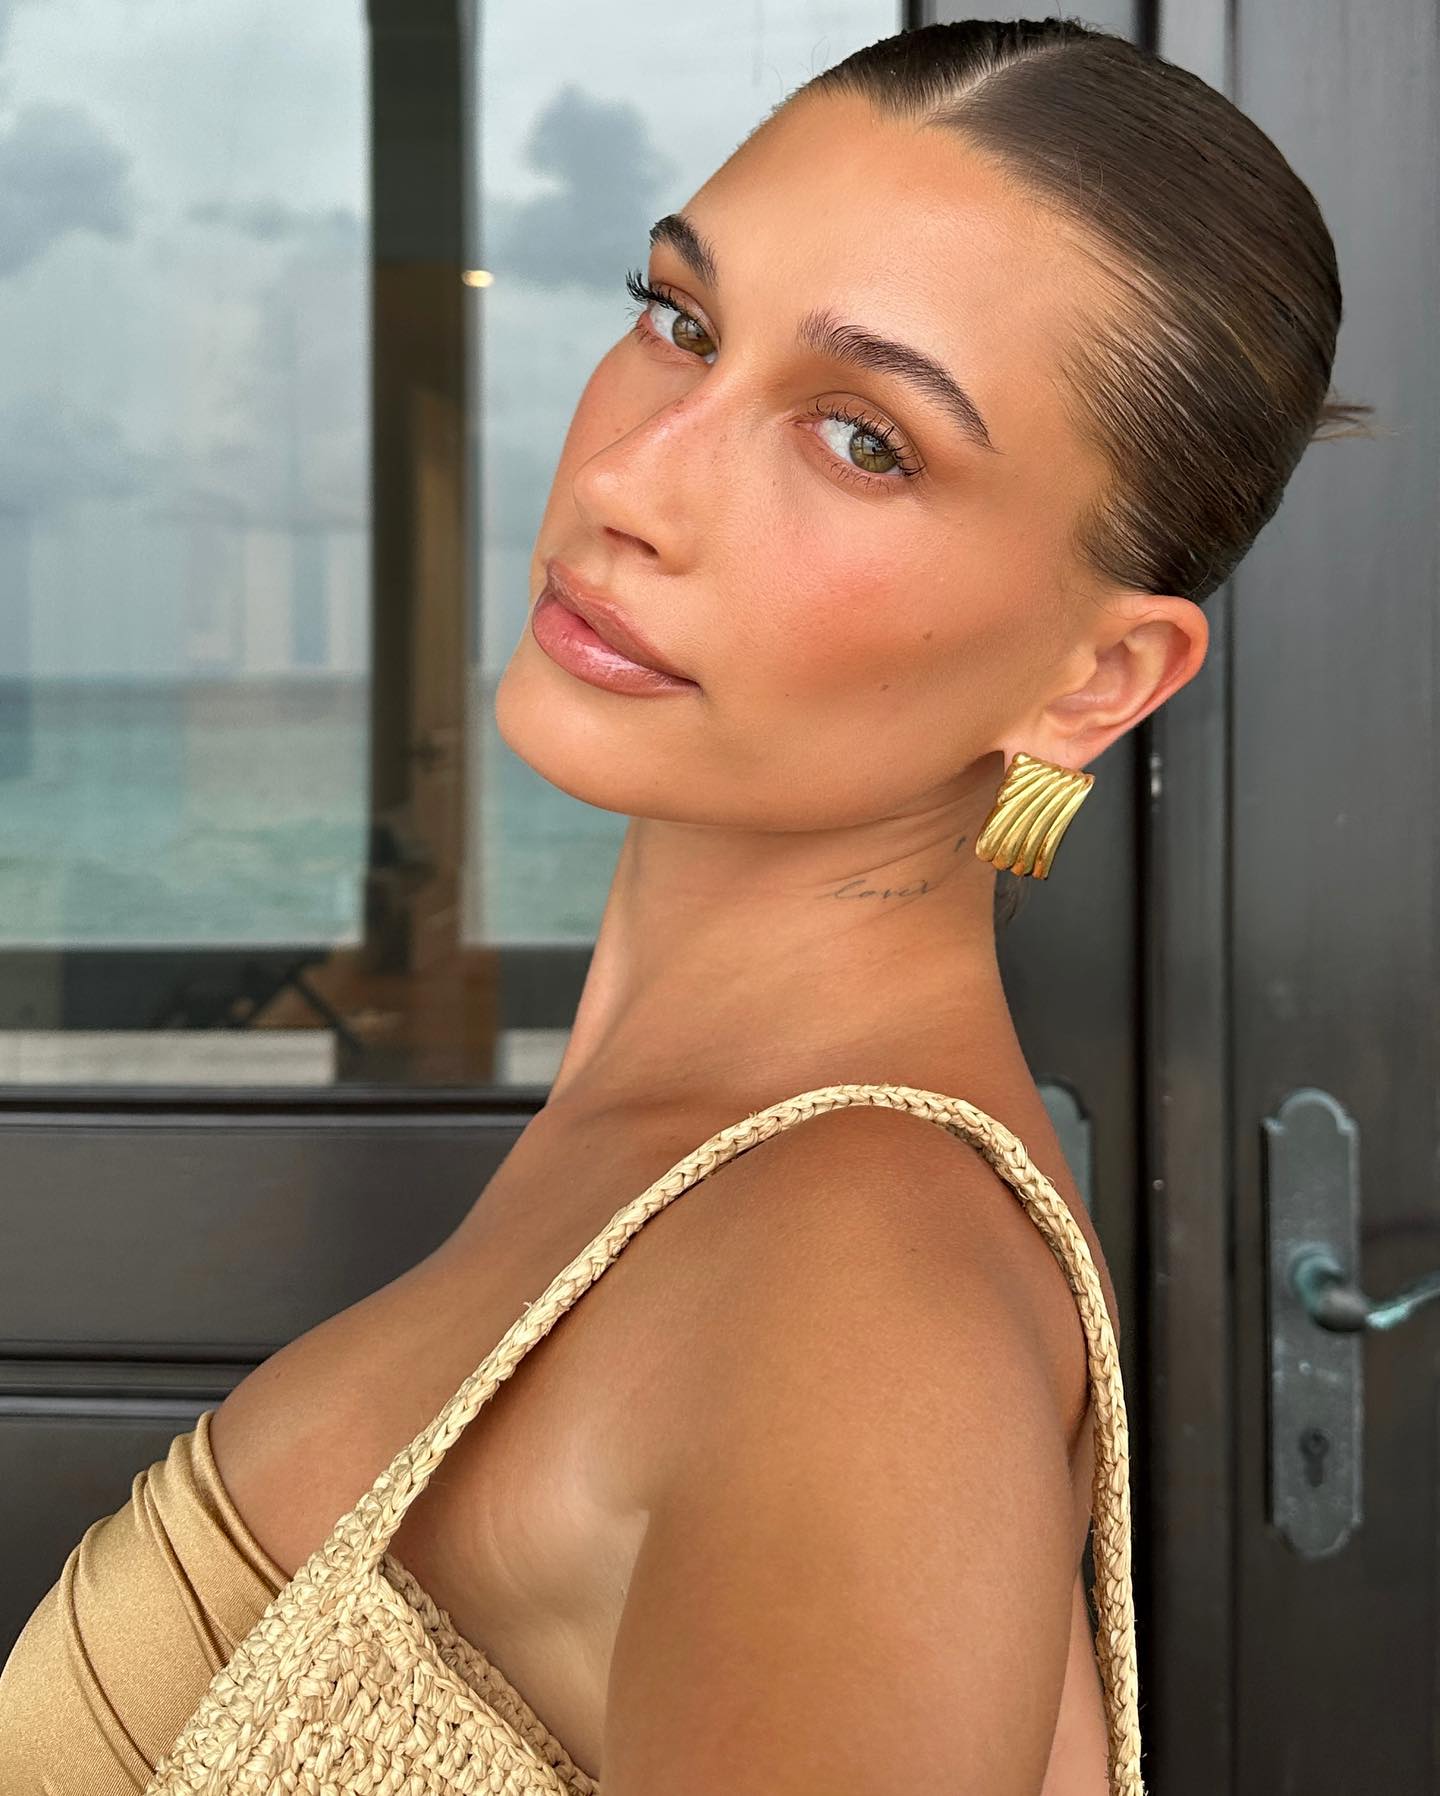 The selfies showed the model standing outside on her porch as she showcased her glammed-up look and gorgeous gold outfit